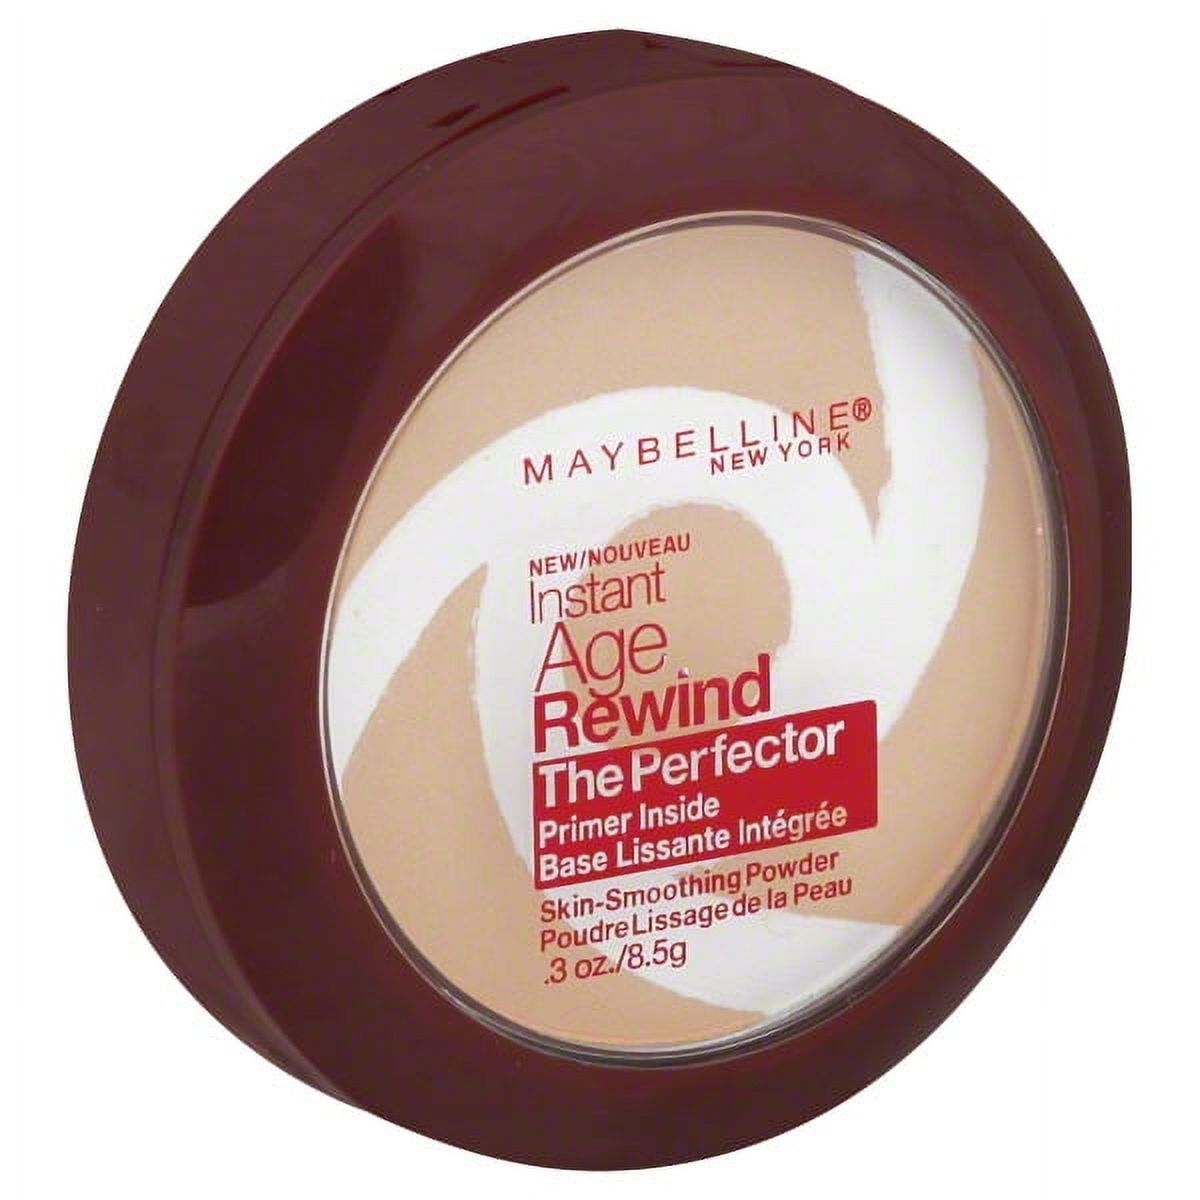 Maybelline Instant Age Rewind The Perfector Primer Powder, Light - image 1 of 7